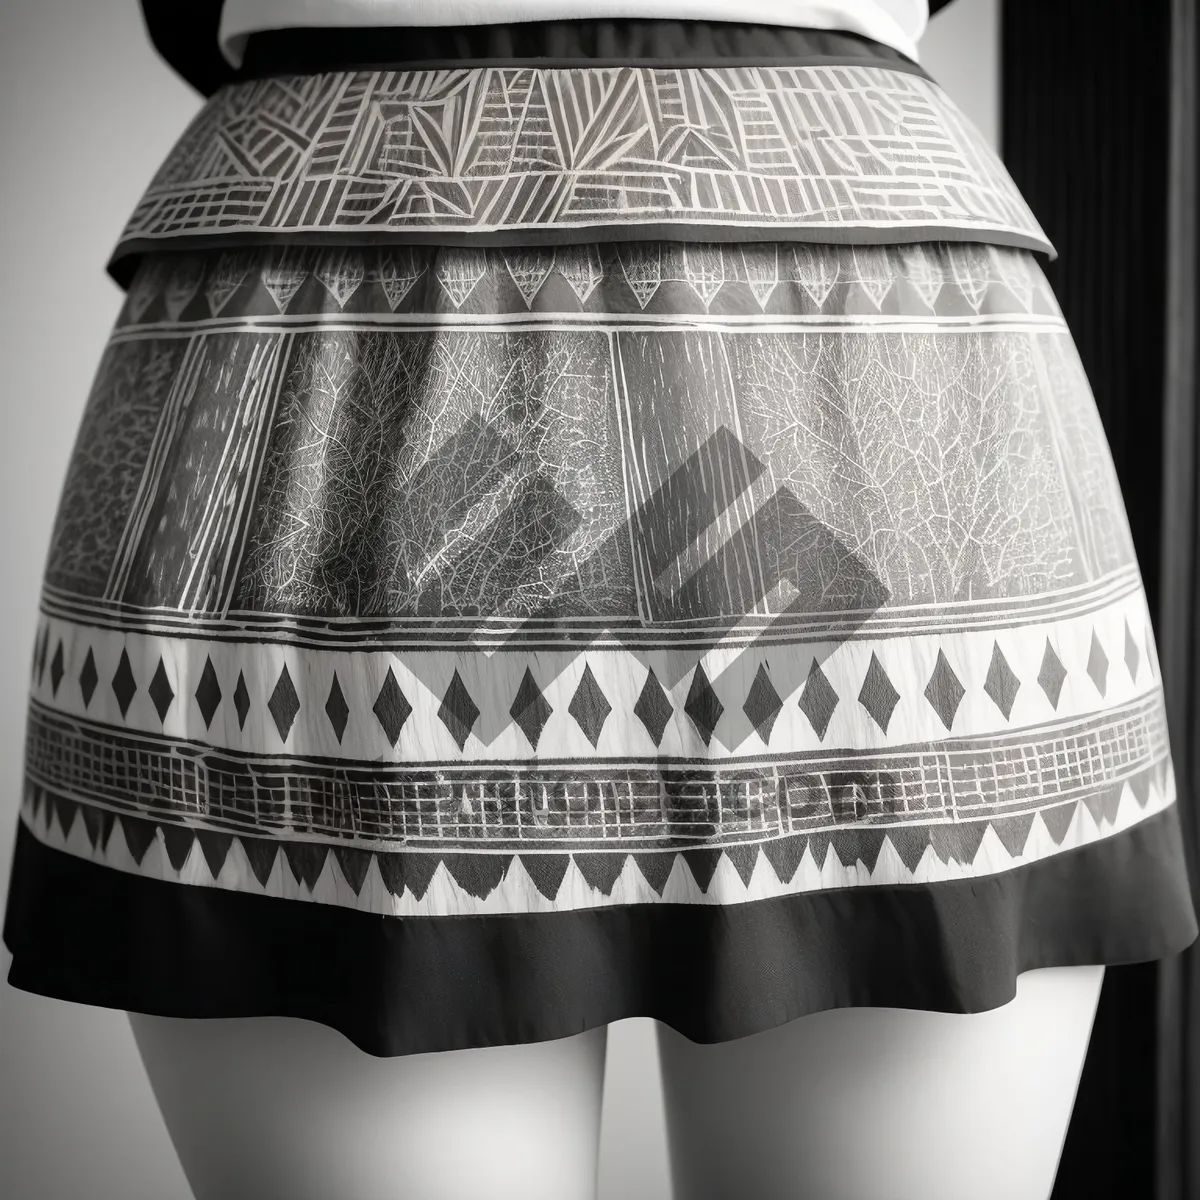 Picture of Stylish Miniskirt Fashion Model with Lampshade Inspired Look